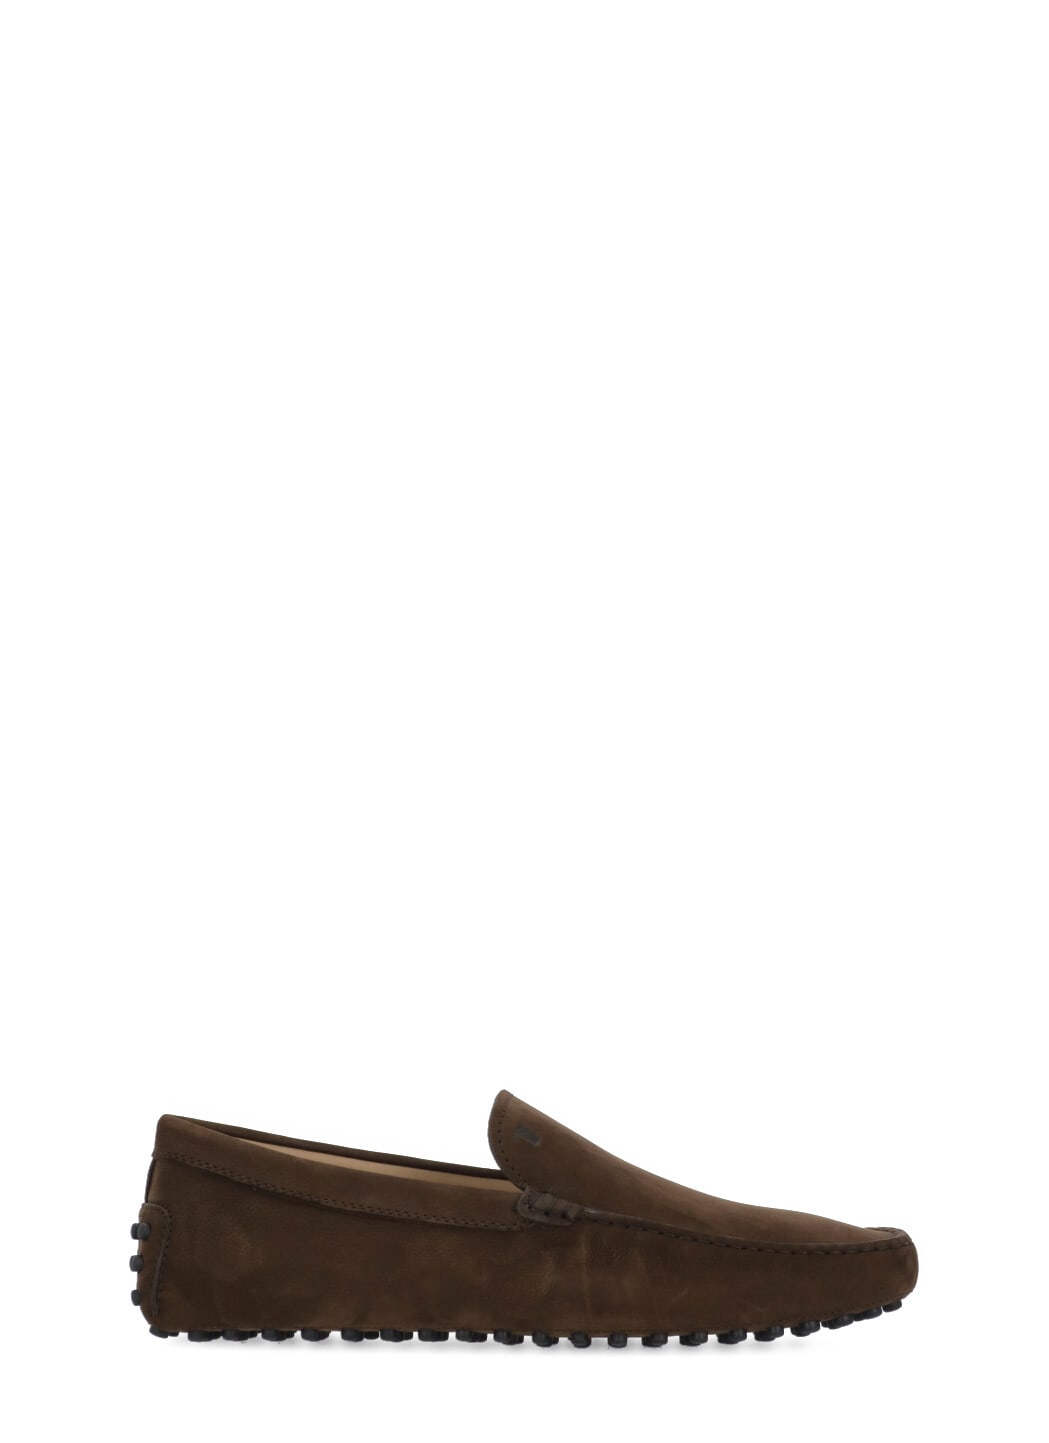 TOD'S SUEDE LEATHER LOAFERS